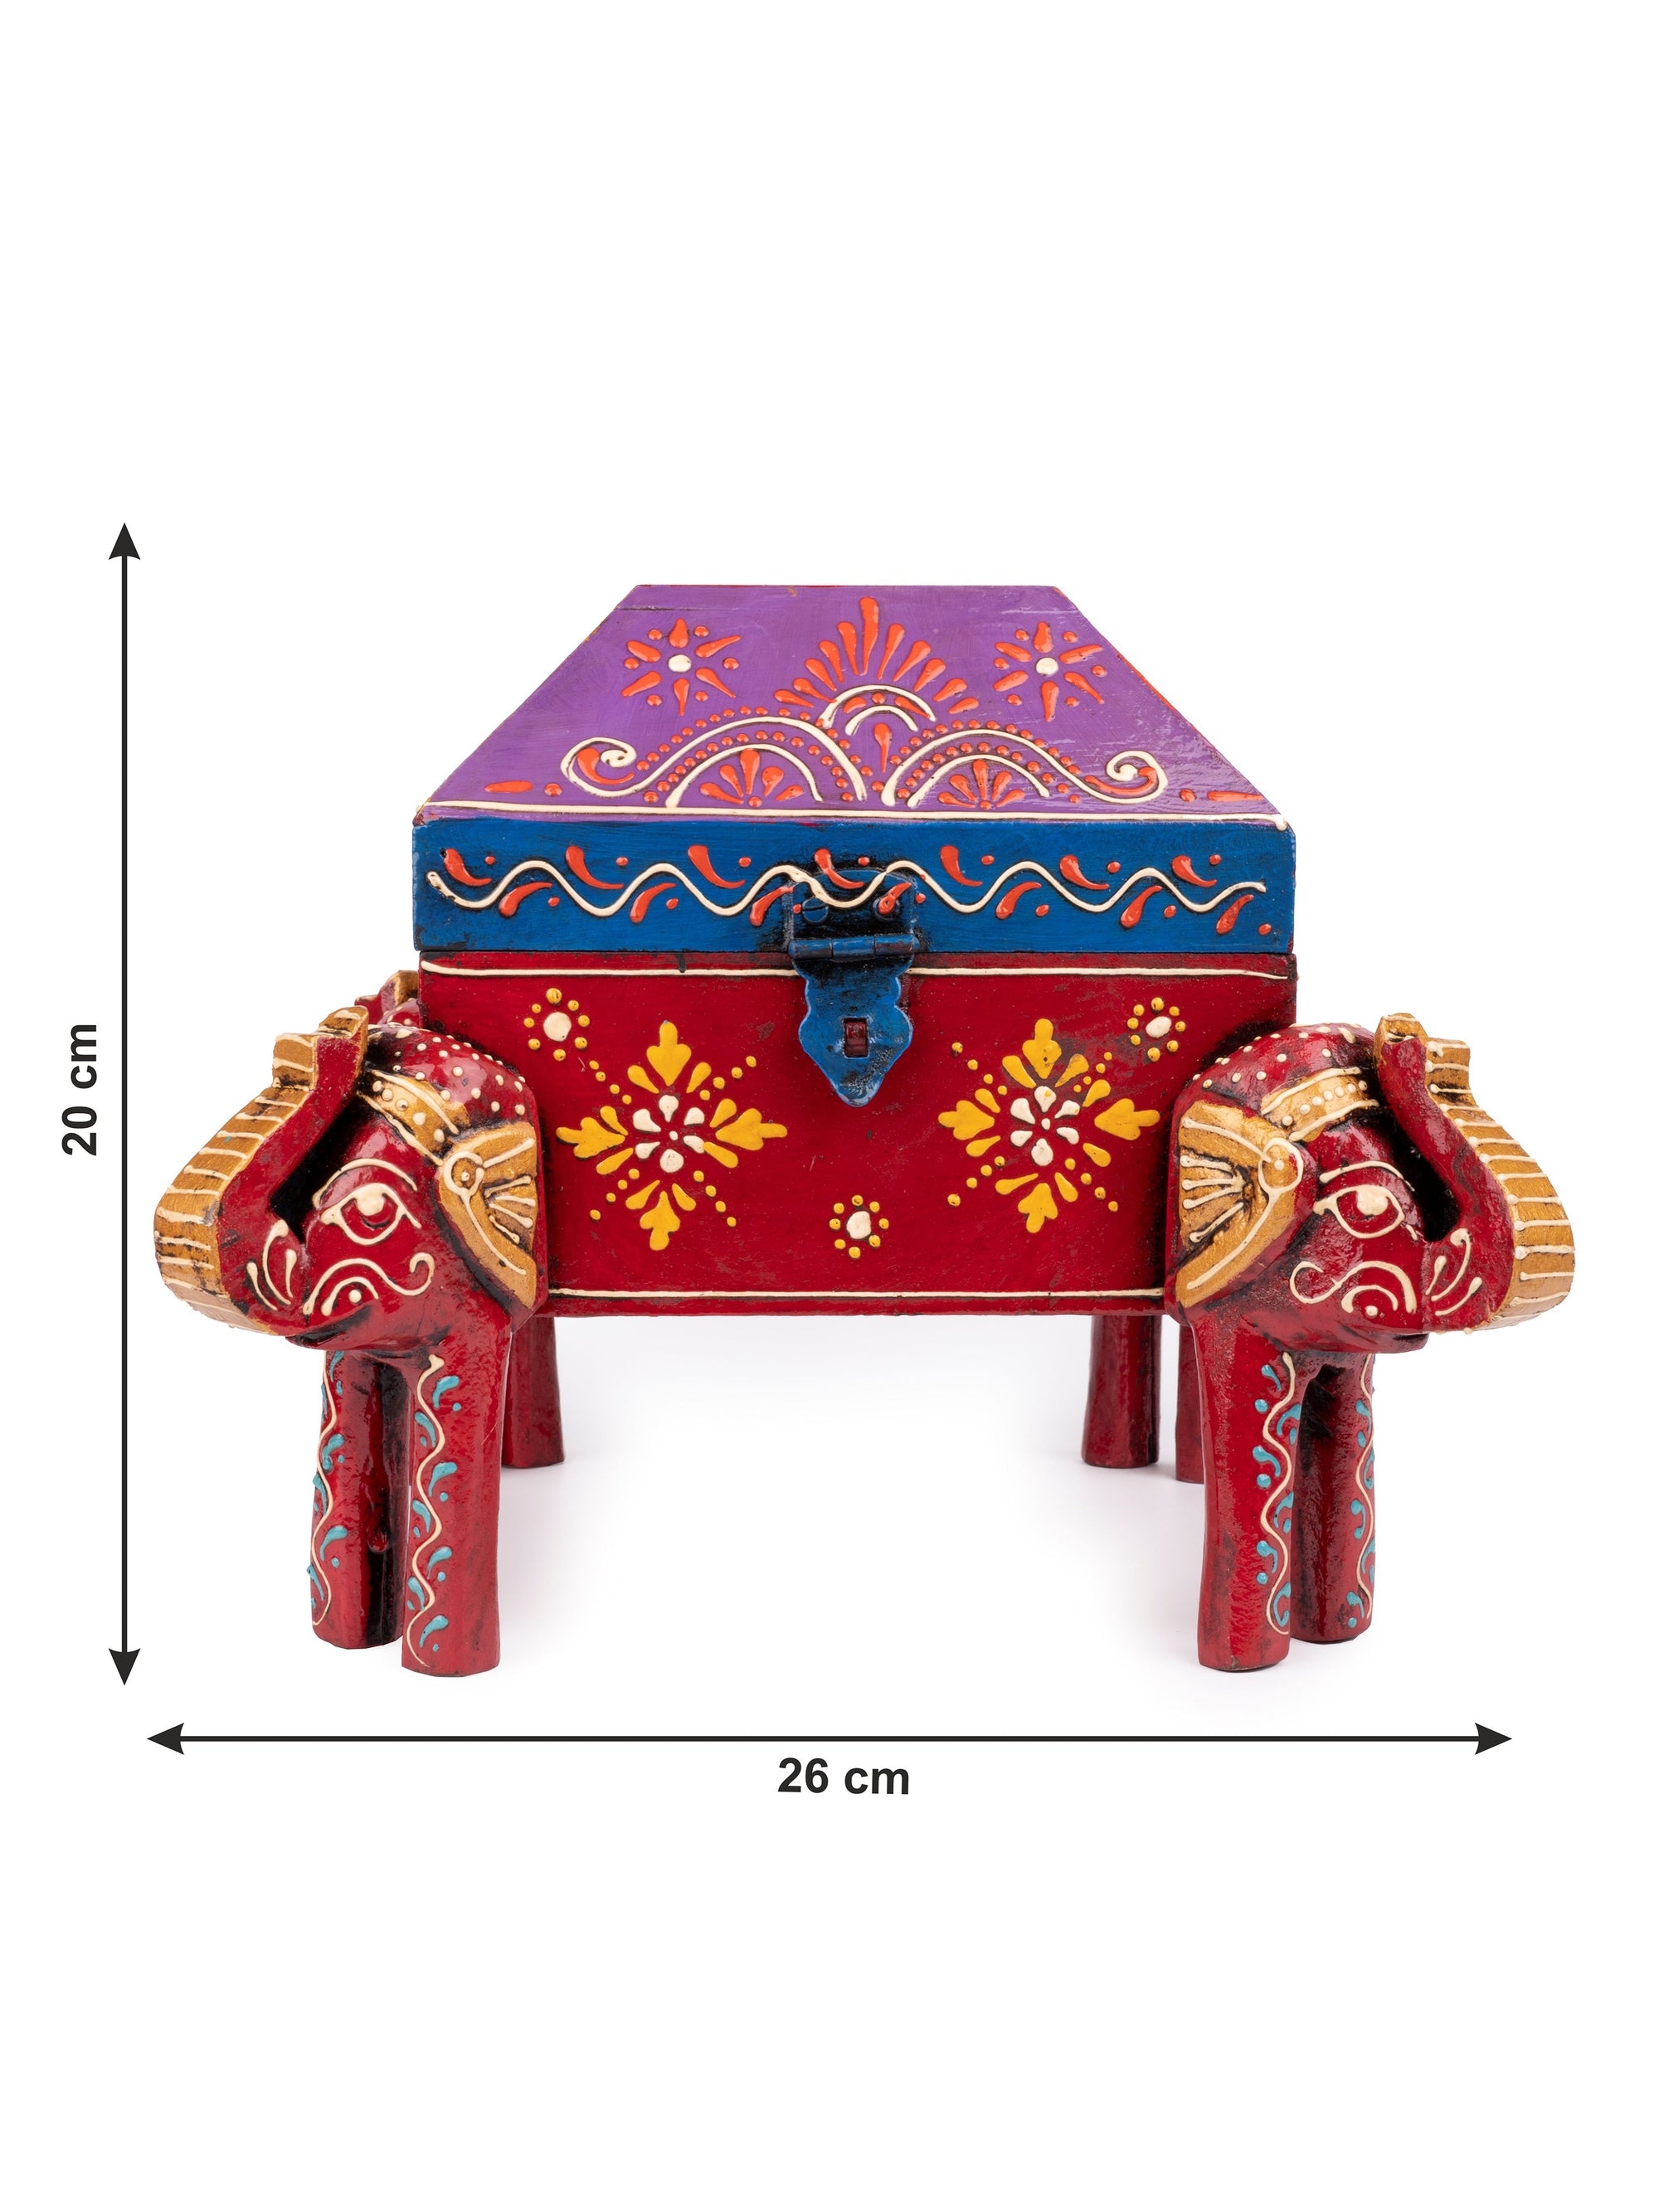 Meenakari Work Four Faced Elephant Box for Multiple Storage Solution - The Heritage Artifacts